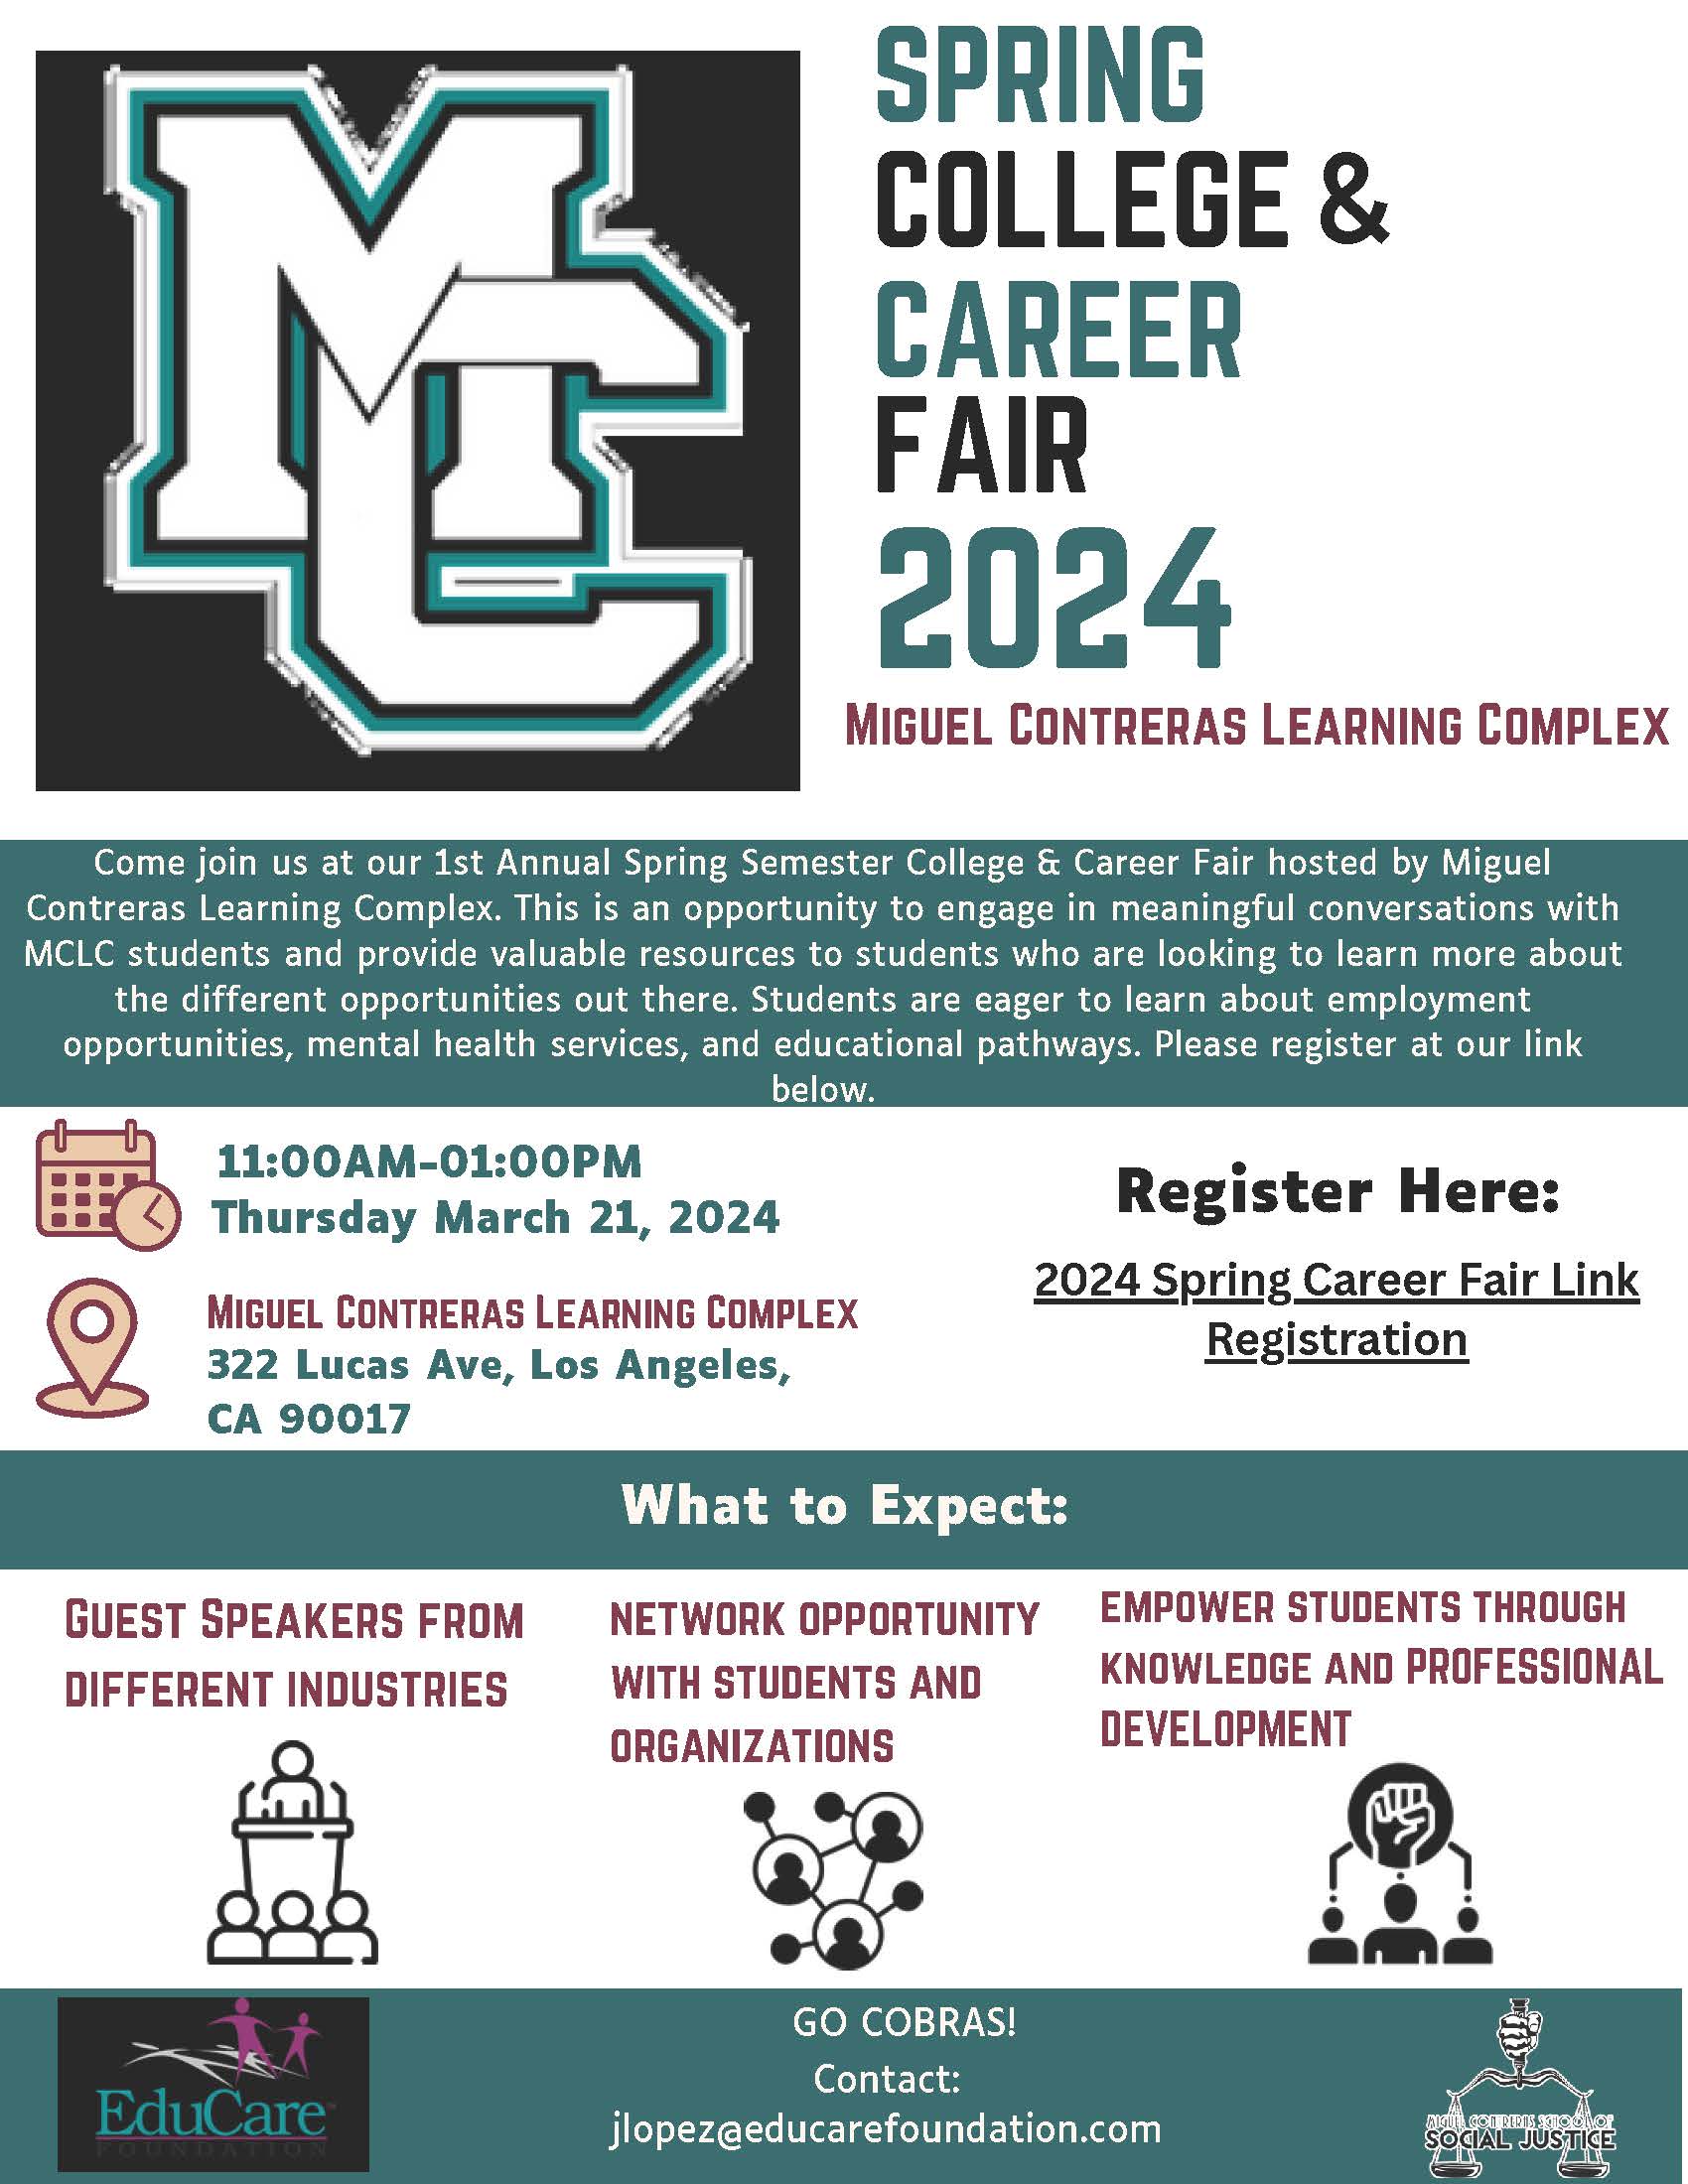 Spring College & Career Fair 2024 information held at Miguel Contreras Learning Complex